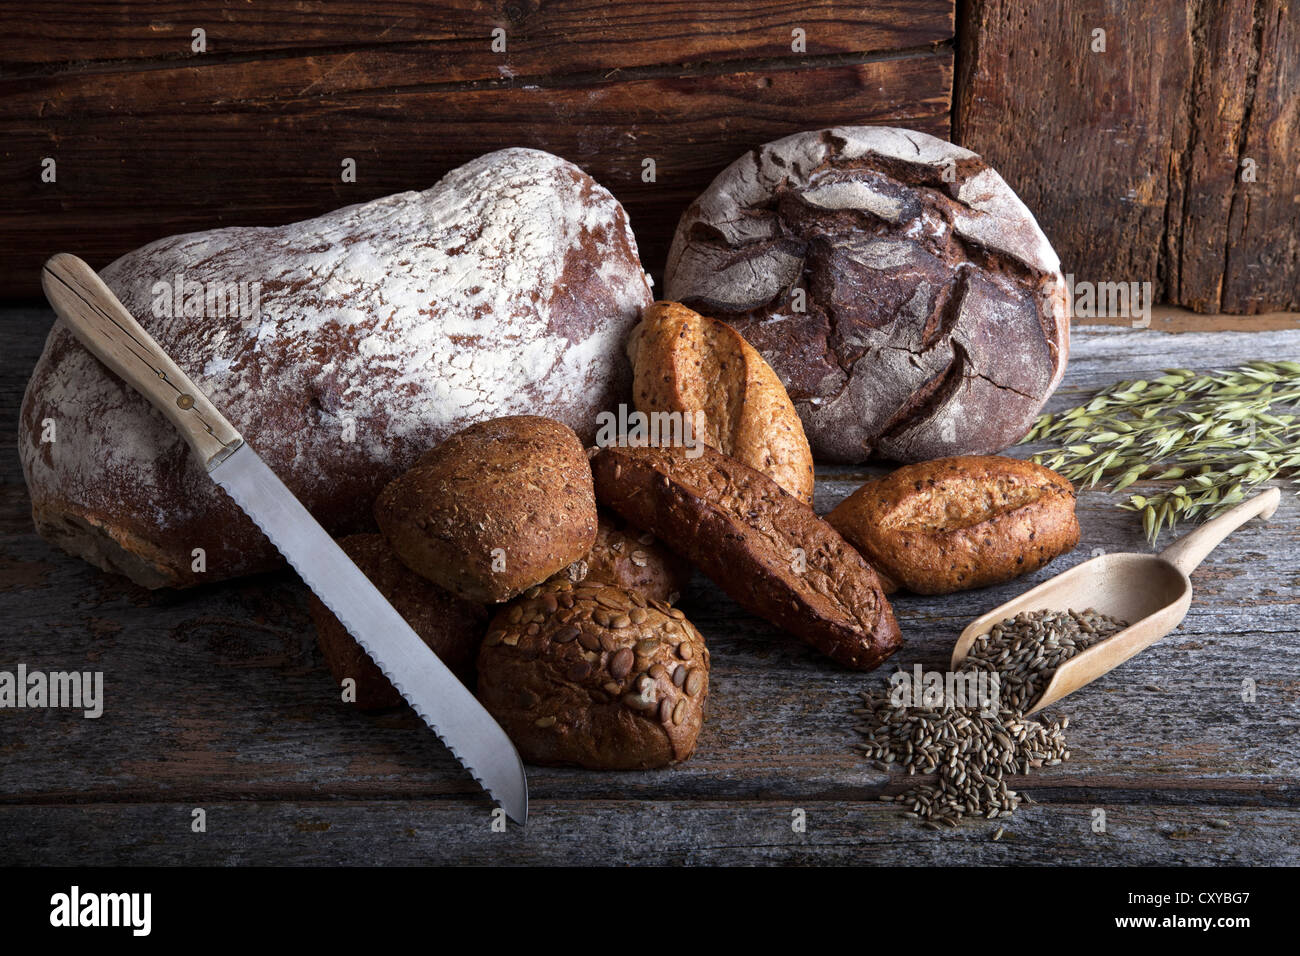 Bread loaves, rolls and a bread knife, rye grain and ears of corn on a rustic wooden surface Stock Photo